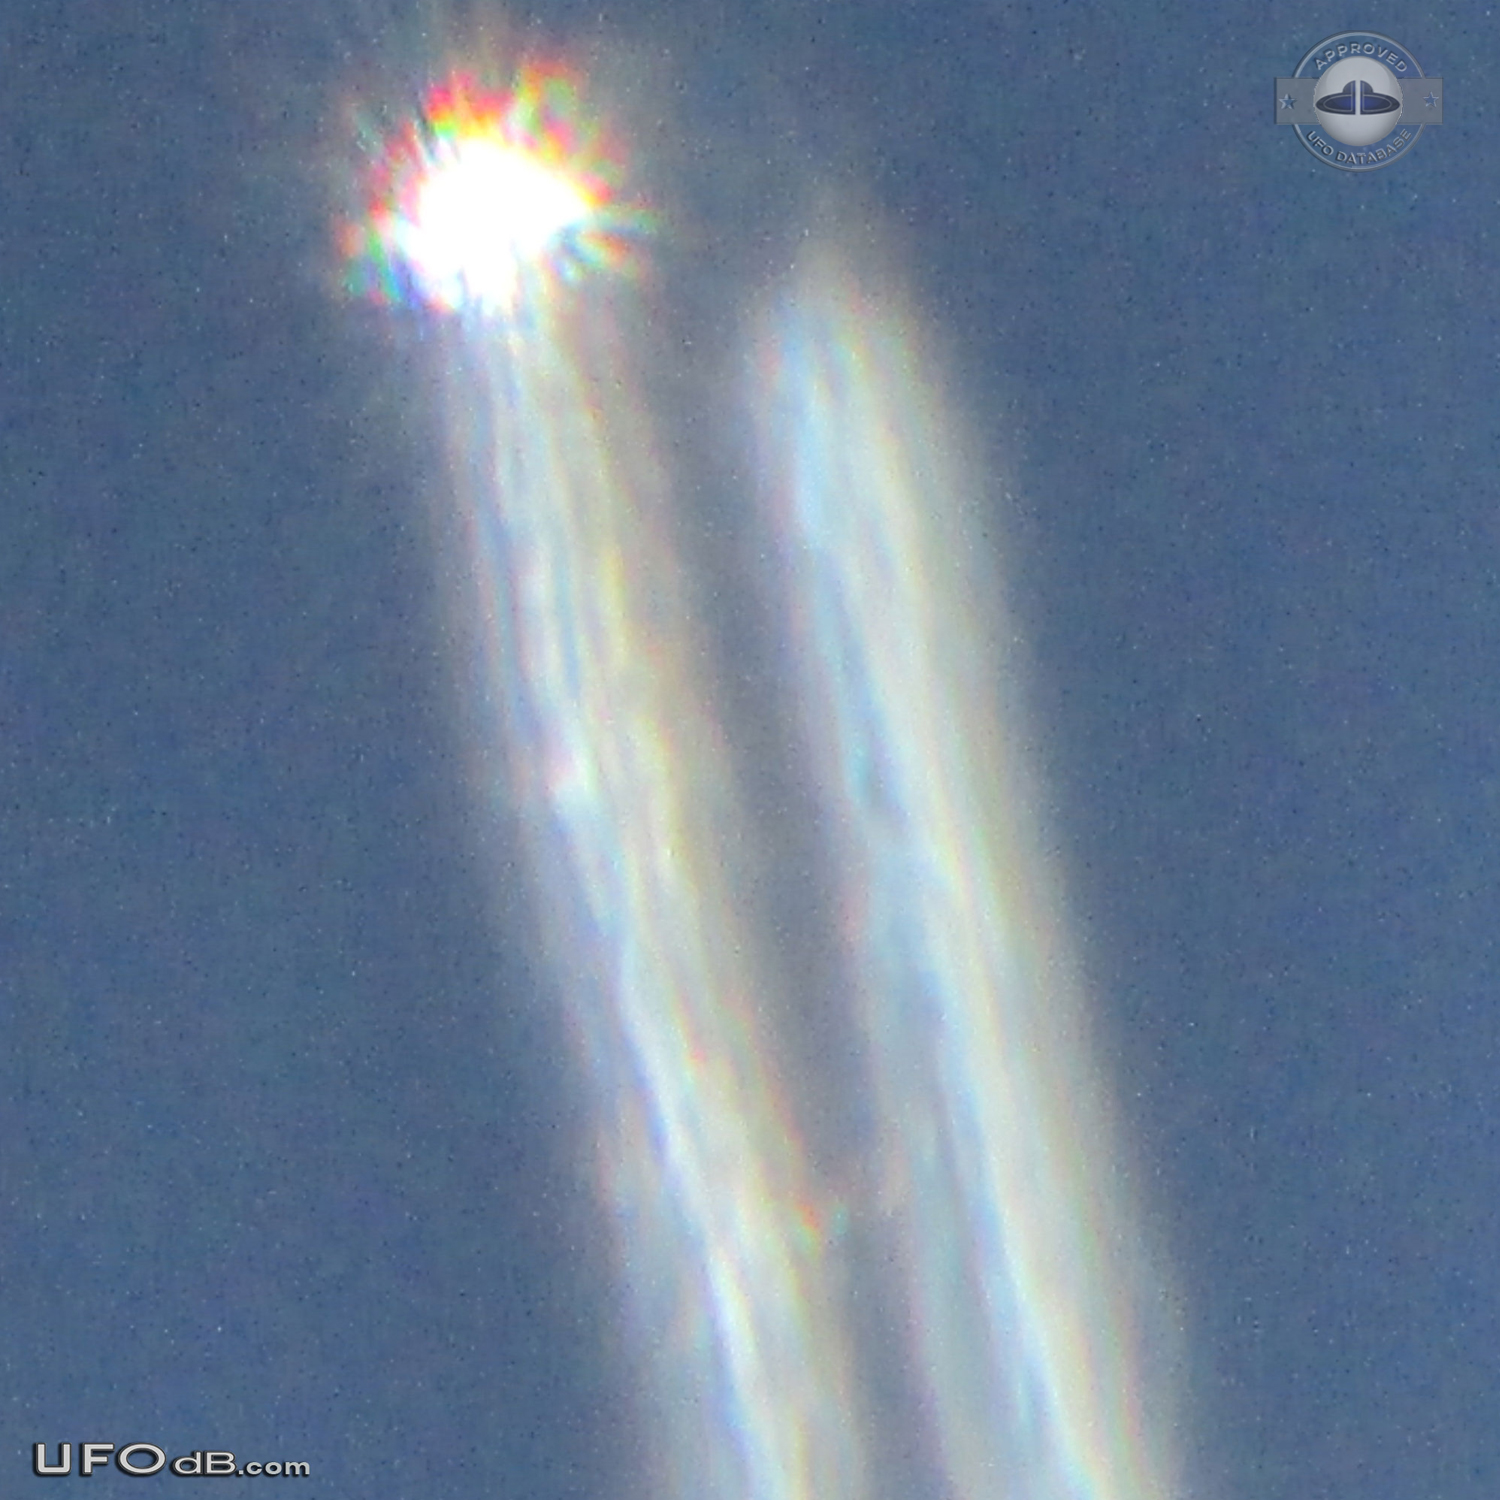 Long cylindrical UFO in bright day light over Virgies, Kentucky 2012 UFO Picture #503-3